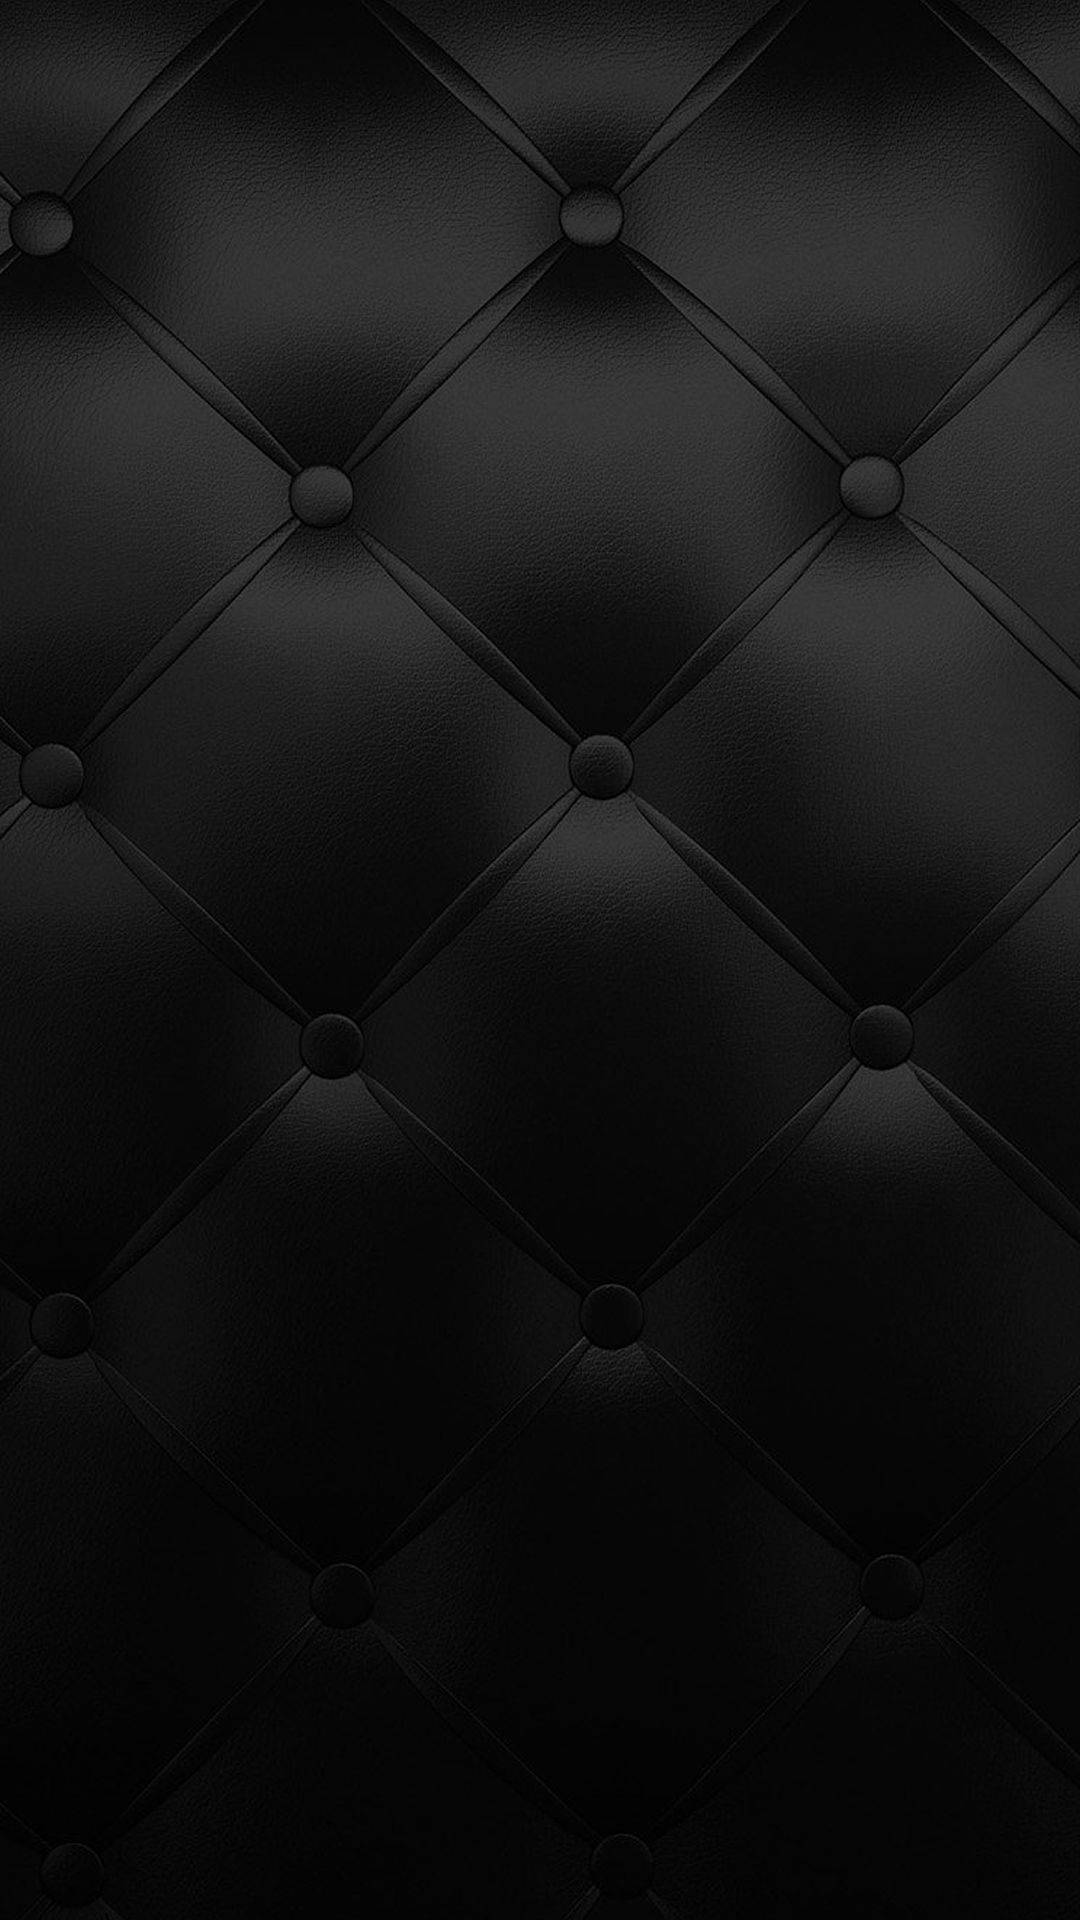 Top 999+ Solid Black Iphone Wallpapers Full HD, 4K✅Free to Use